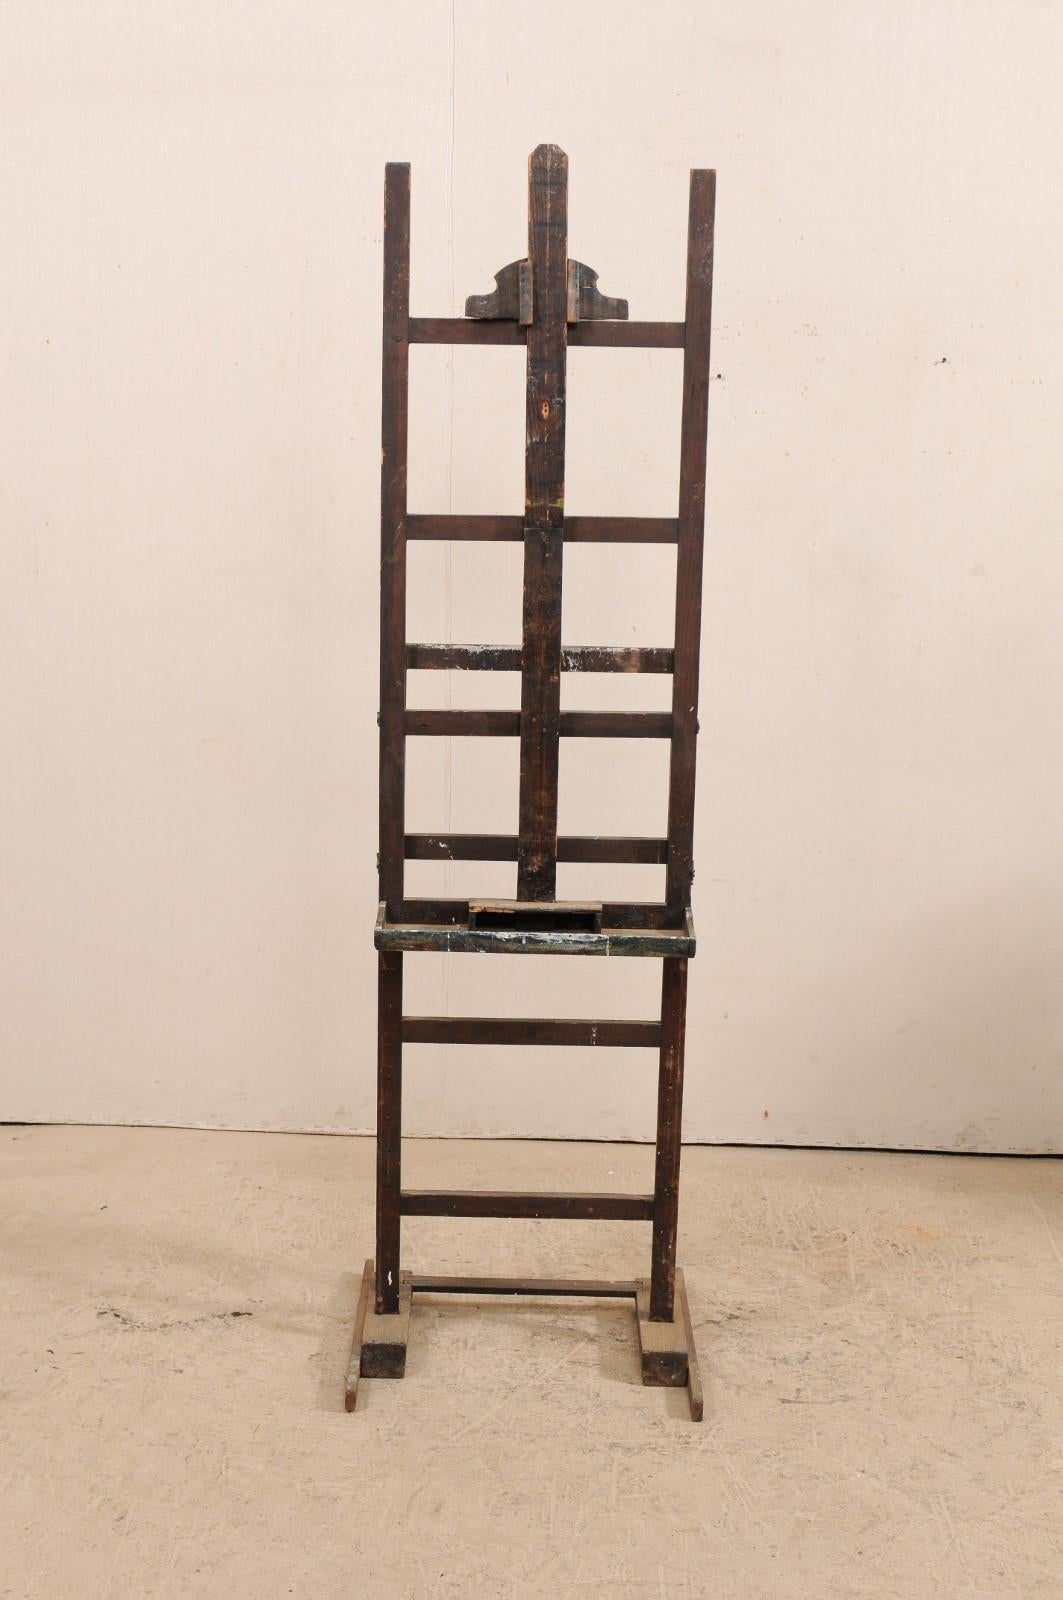 A French wooden adjustable artist easel from the early 20th century. This good-sized antique easel has a small supply shelf, support for a painting, and an adjusted frame. This piece is supported by a H-shaped braced feet. This rustic French easel